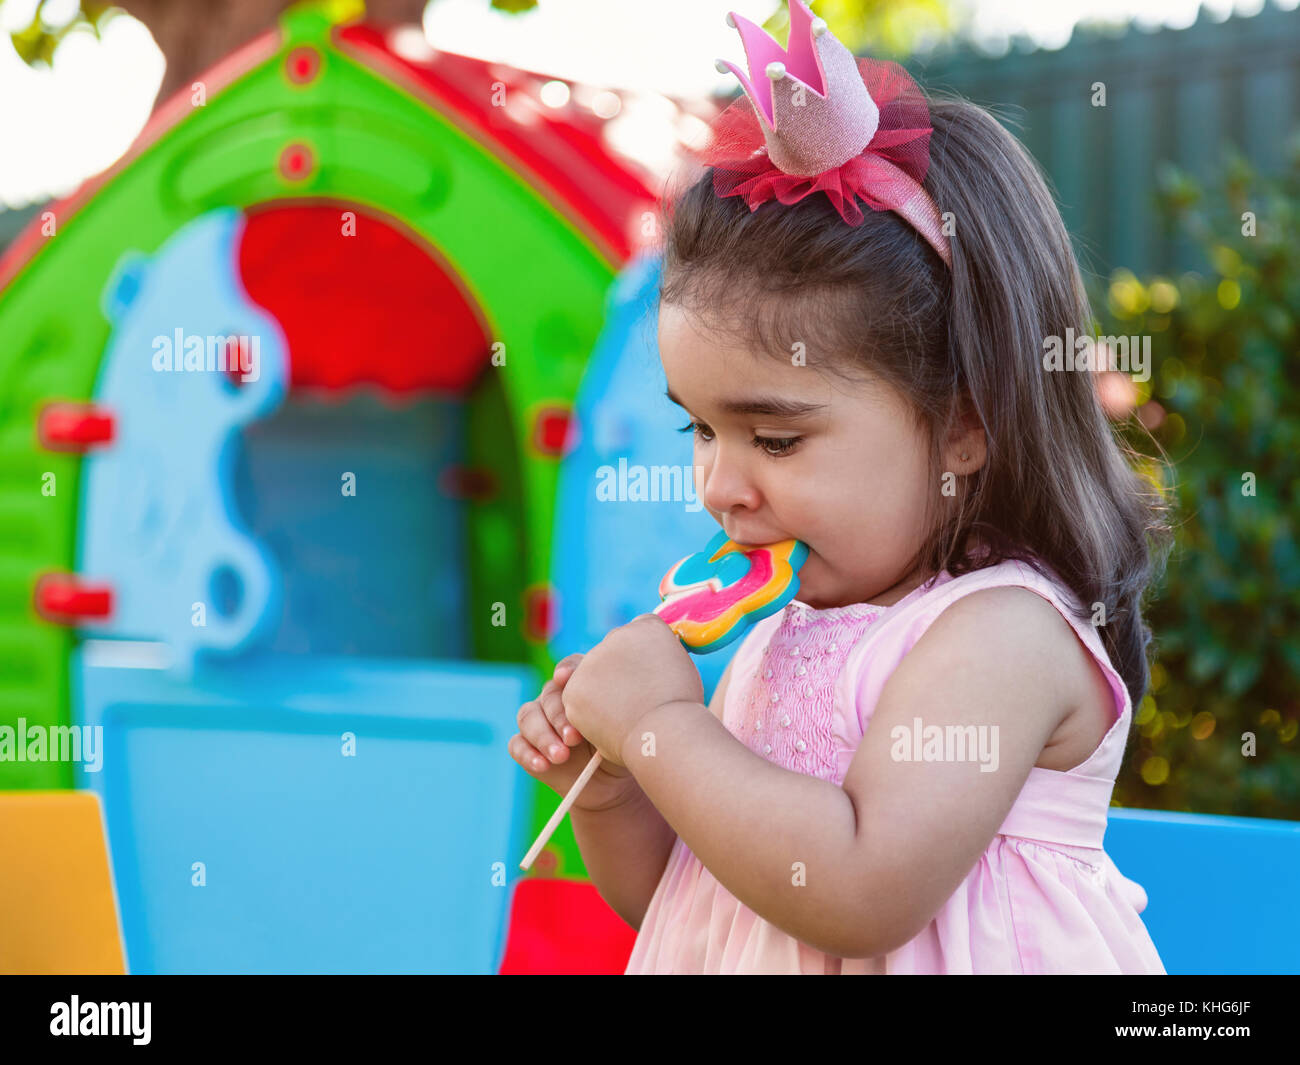 Baby toddler girl eating a large colorful lollipop dressed in pink dress as princess or queen with crown, playing outdoor in garden with playhouse Stock Photo